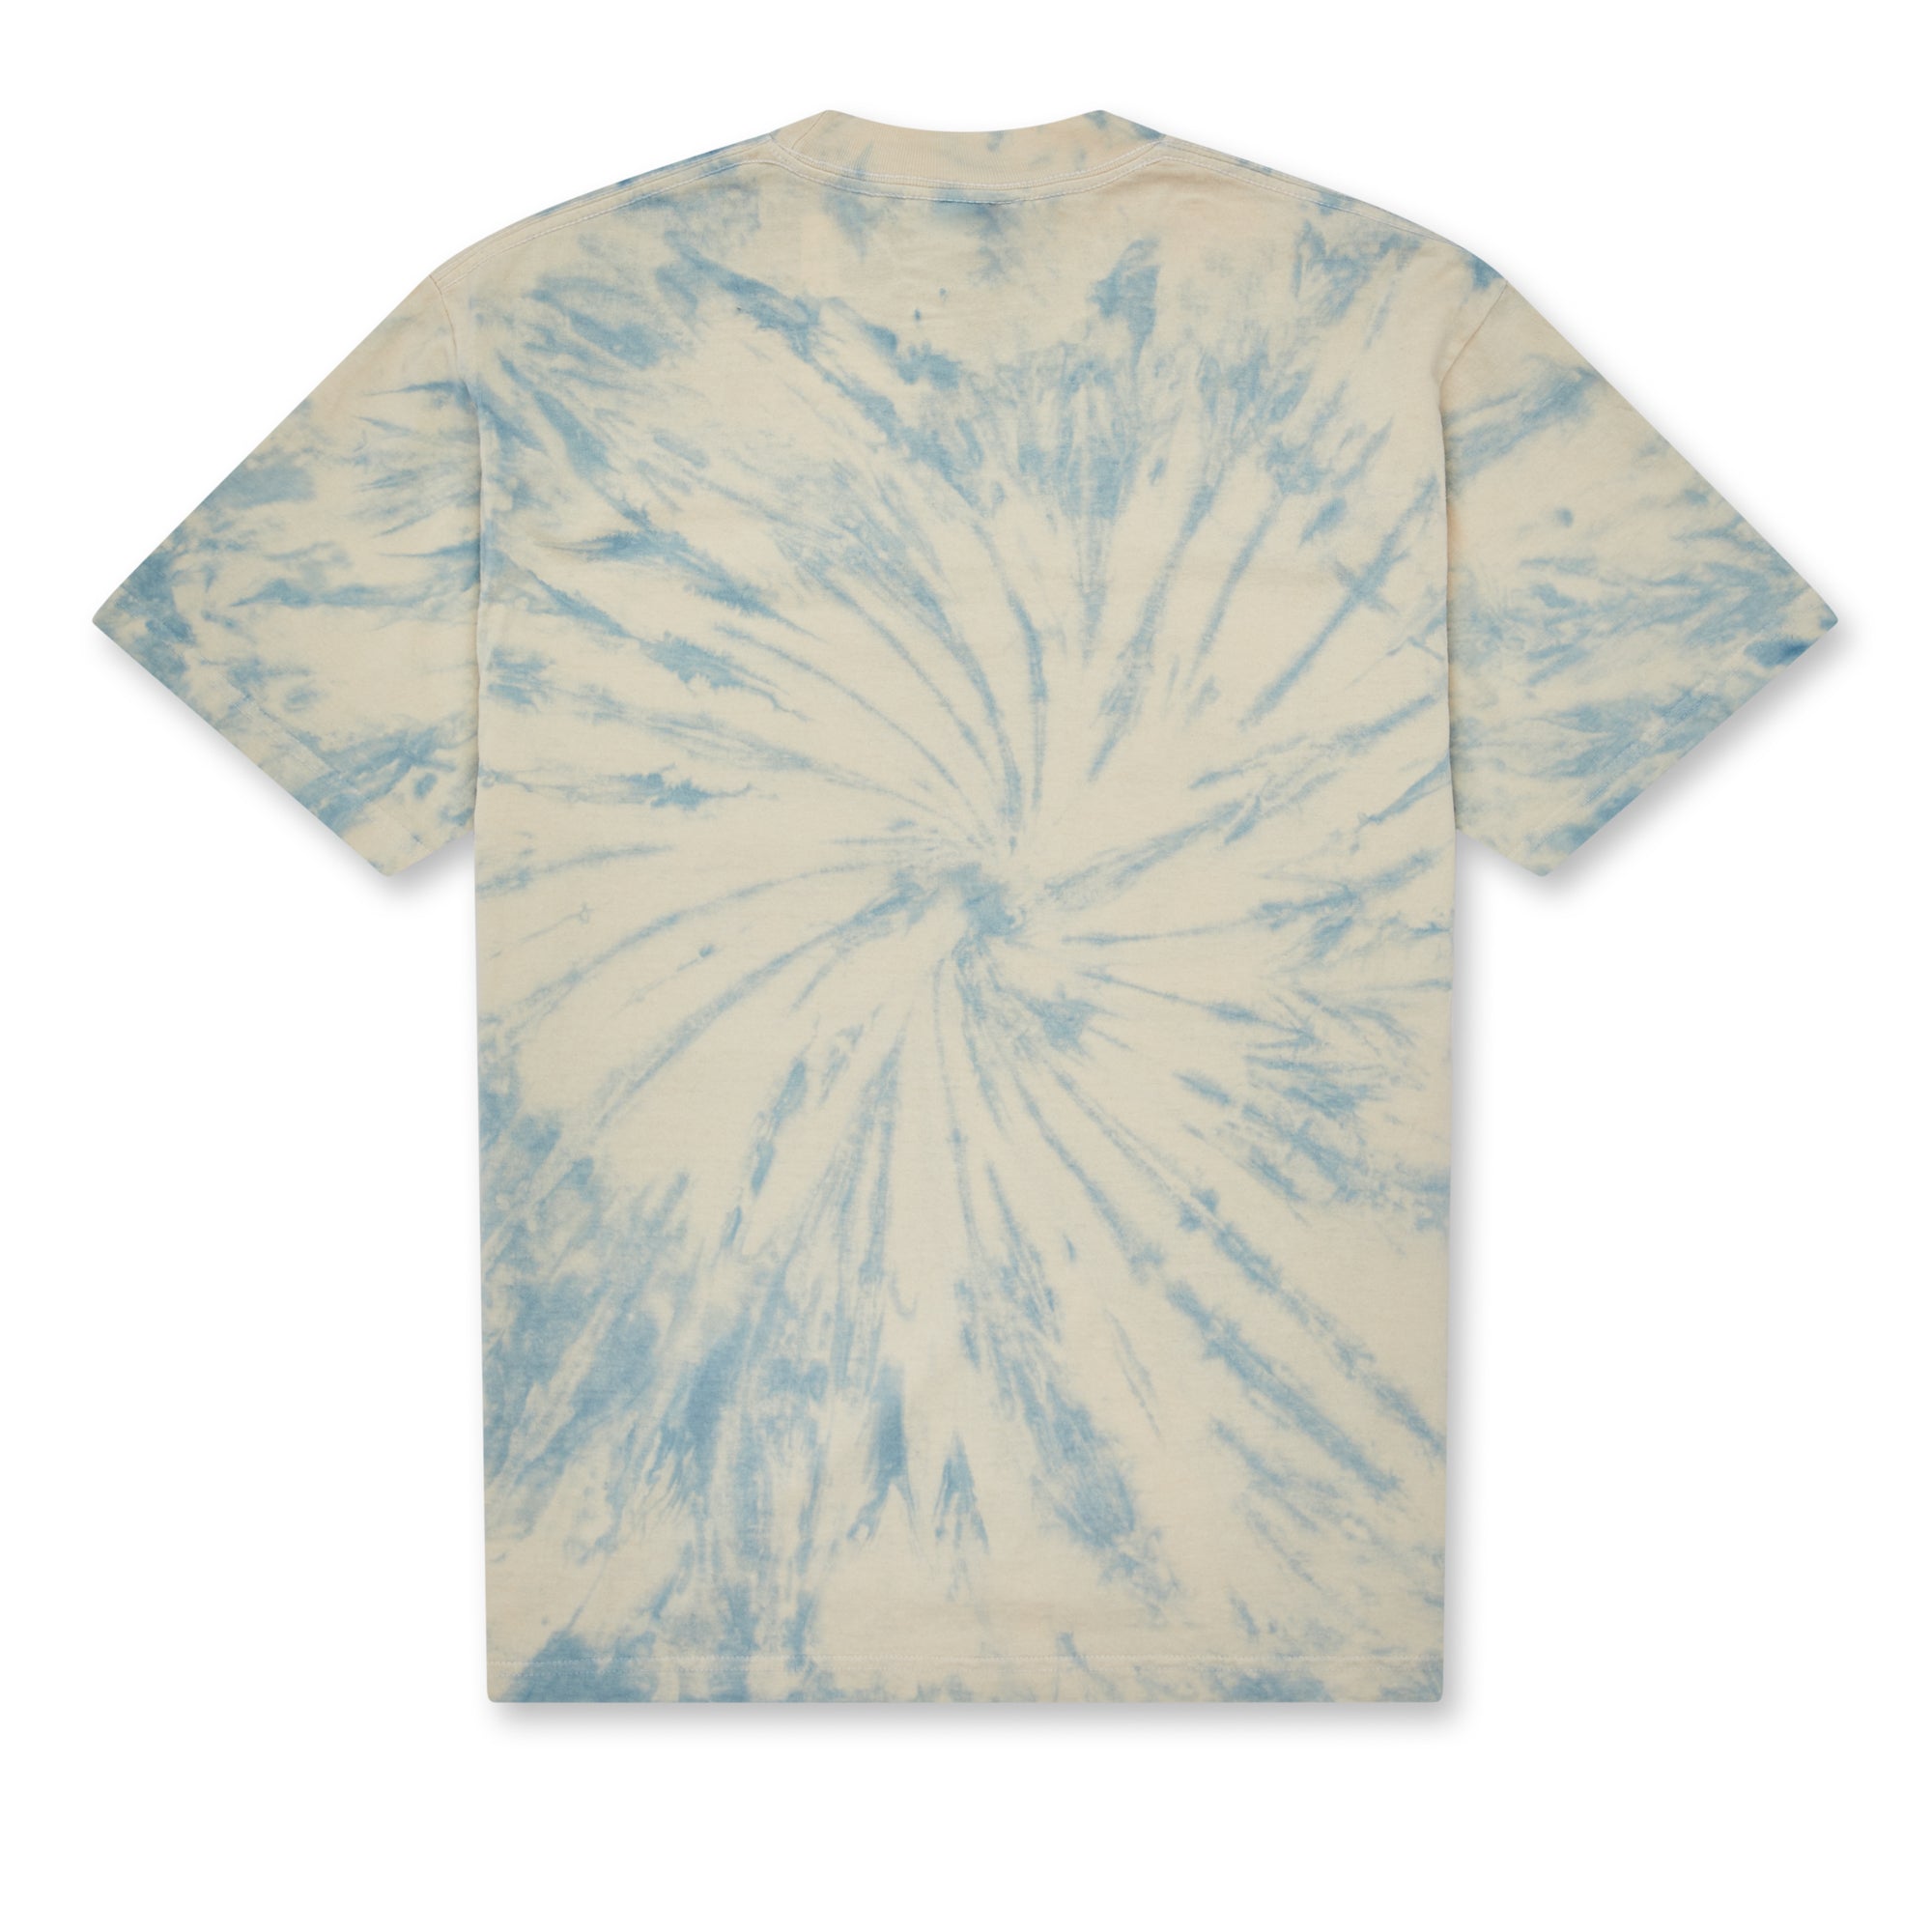 Online Ceramics - Stars Of The Earth T-Shirt - (Hand Dye) view 2